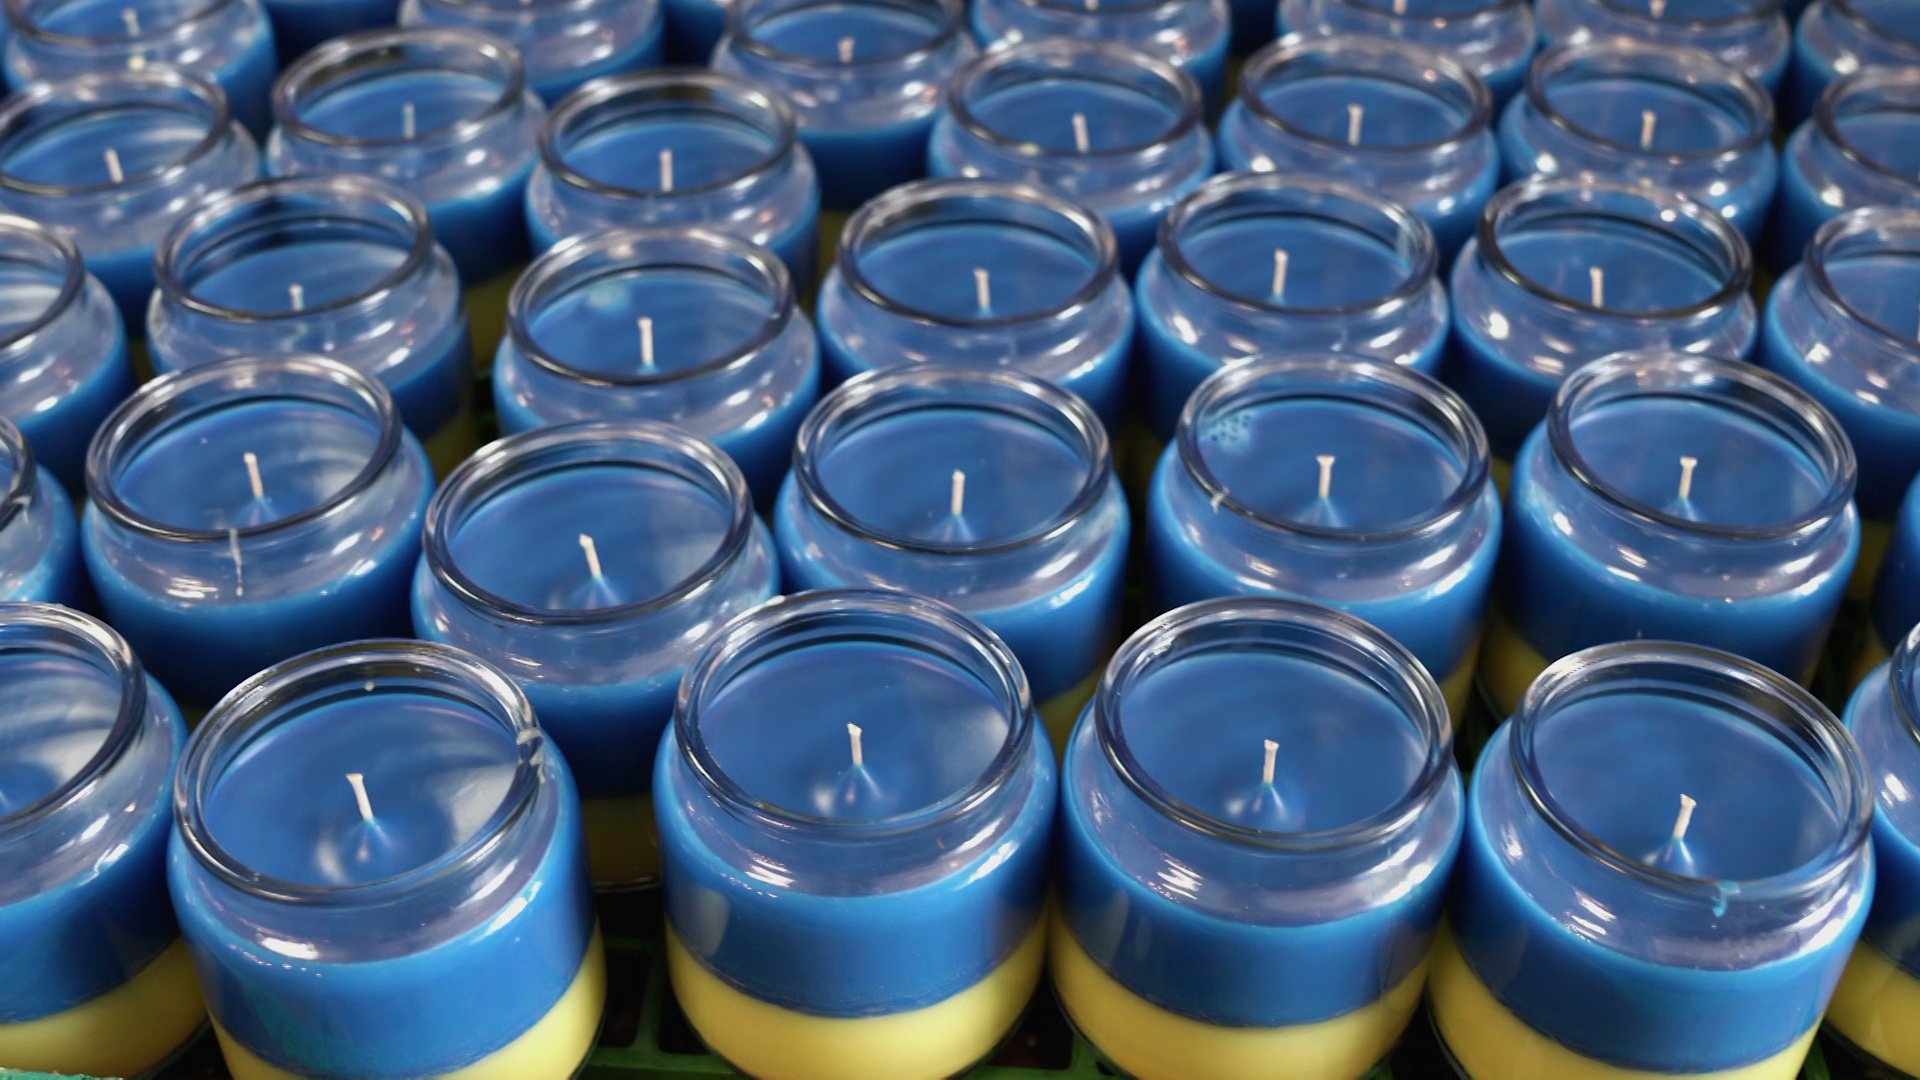 Rows of candles in glass jars with a top blue layer and a bottom yellow layer sit on a table.